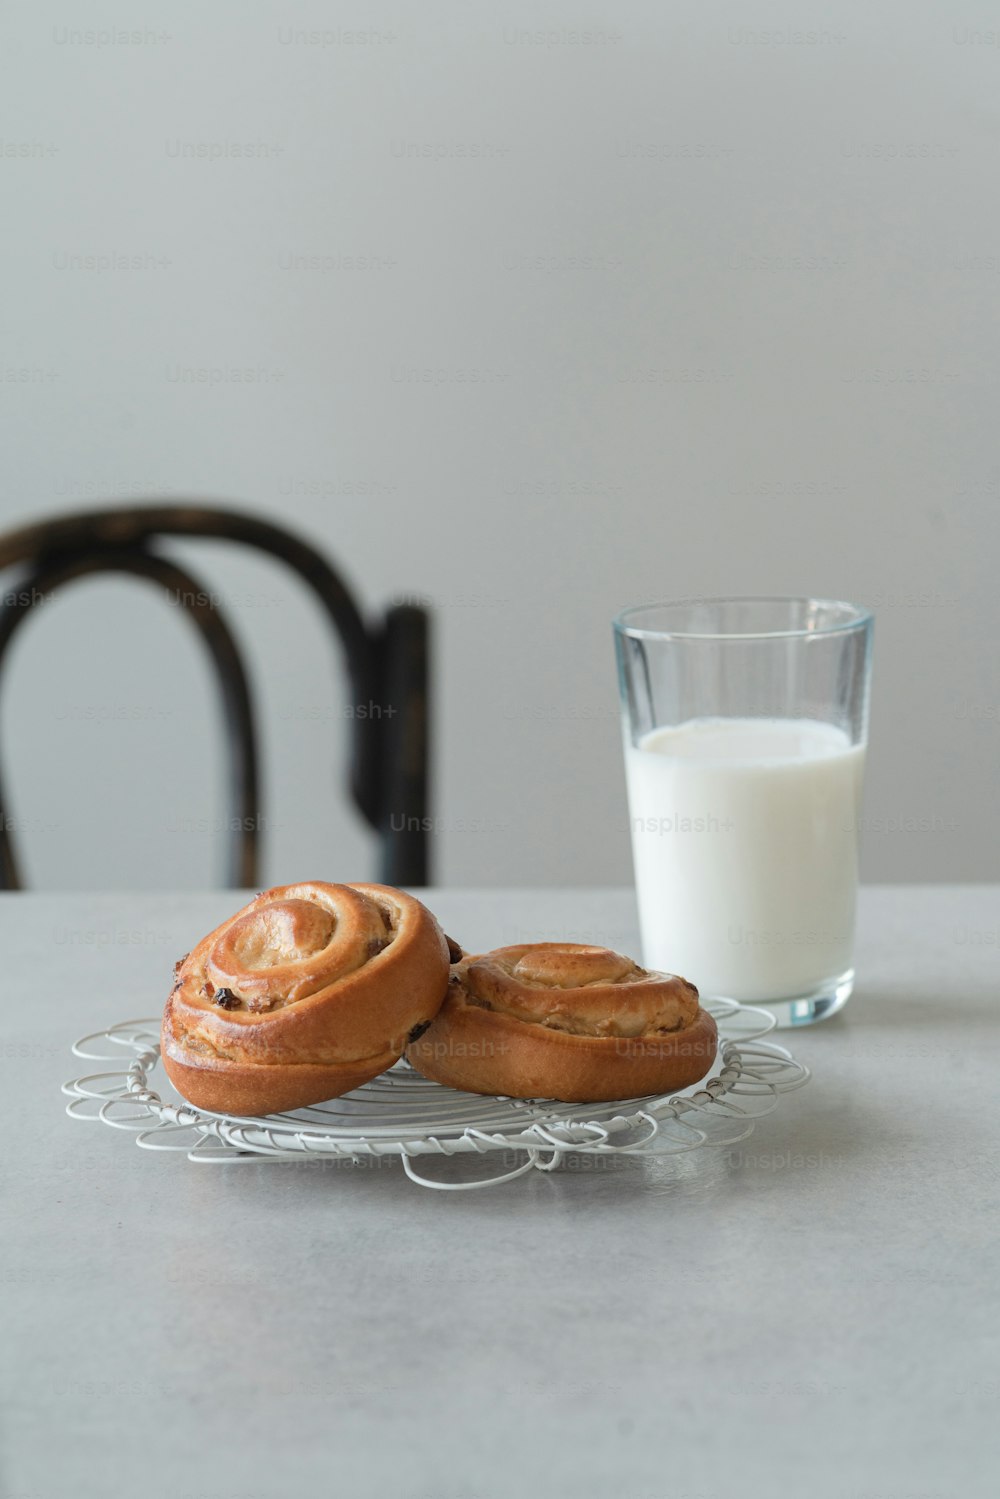 a glass of milk and two cinnamon buns on a plate